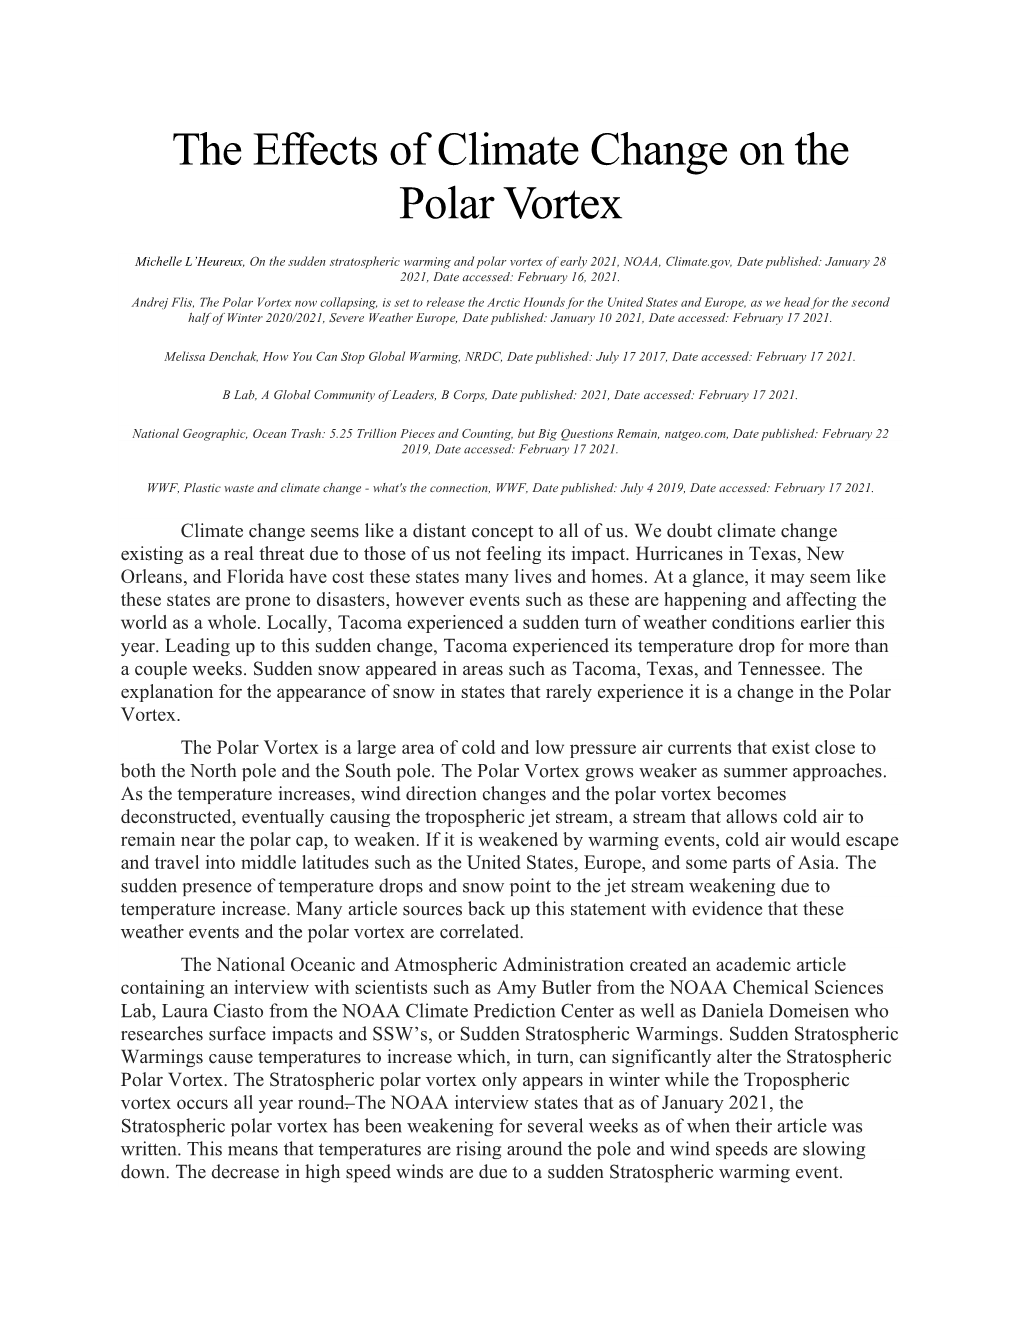 The Effects of Climate Change on the Polar Vortex